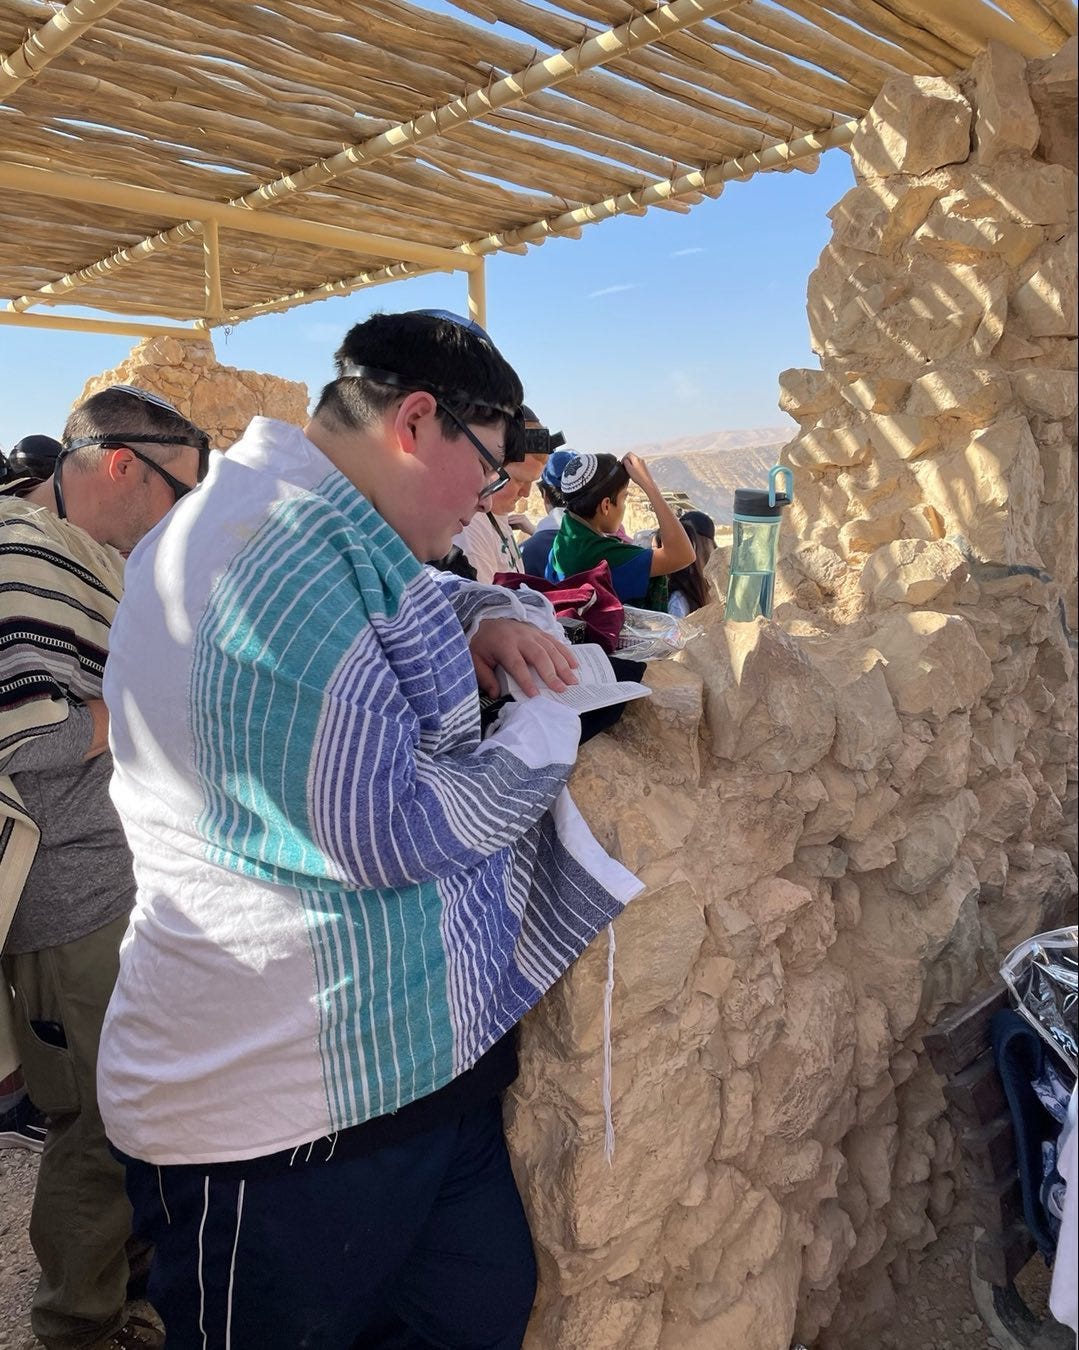 The author wears a tallit and tefillin and prays